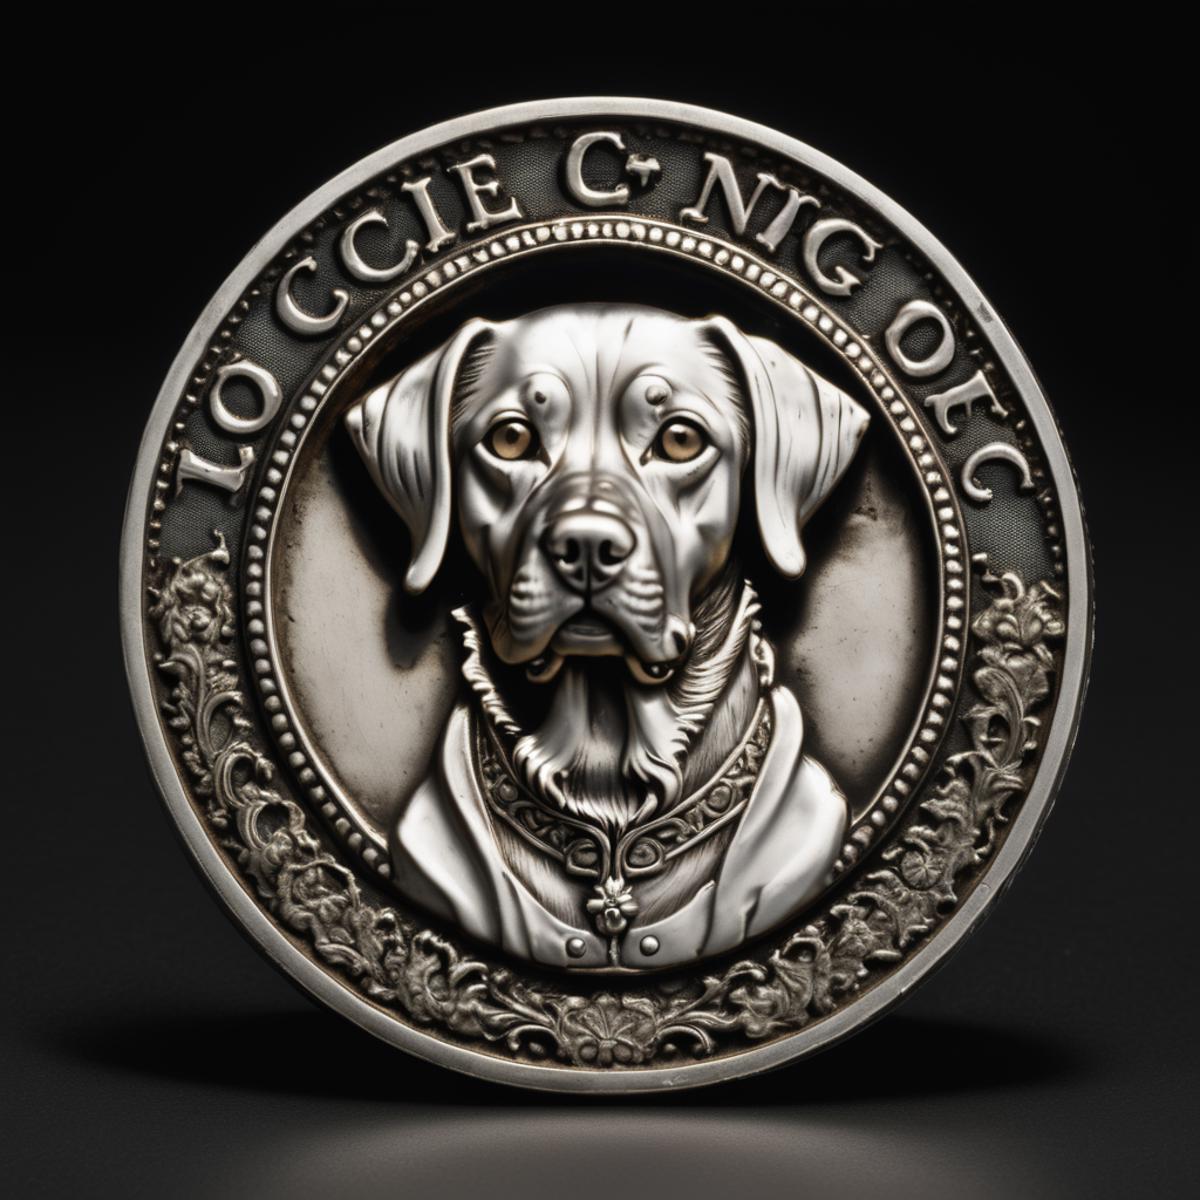 C.A.G. - Coinmaker image